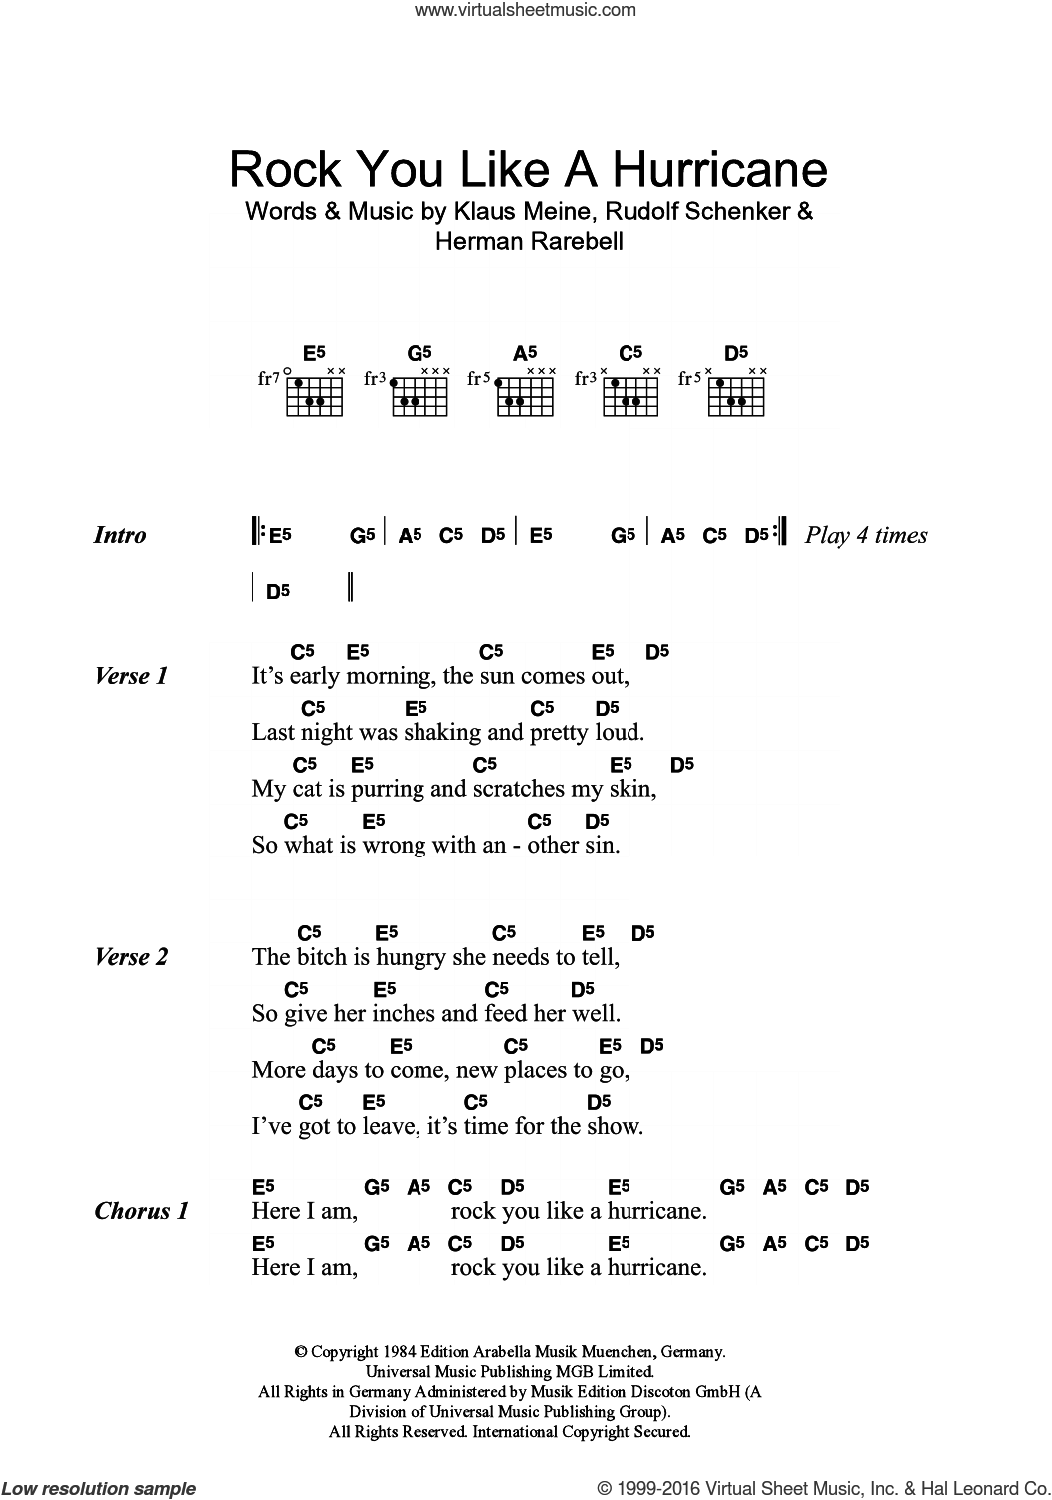 Free sheet music preview of Rock You Like A Hurricane for guitar (chords) b...